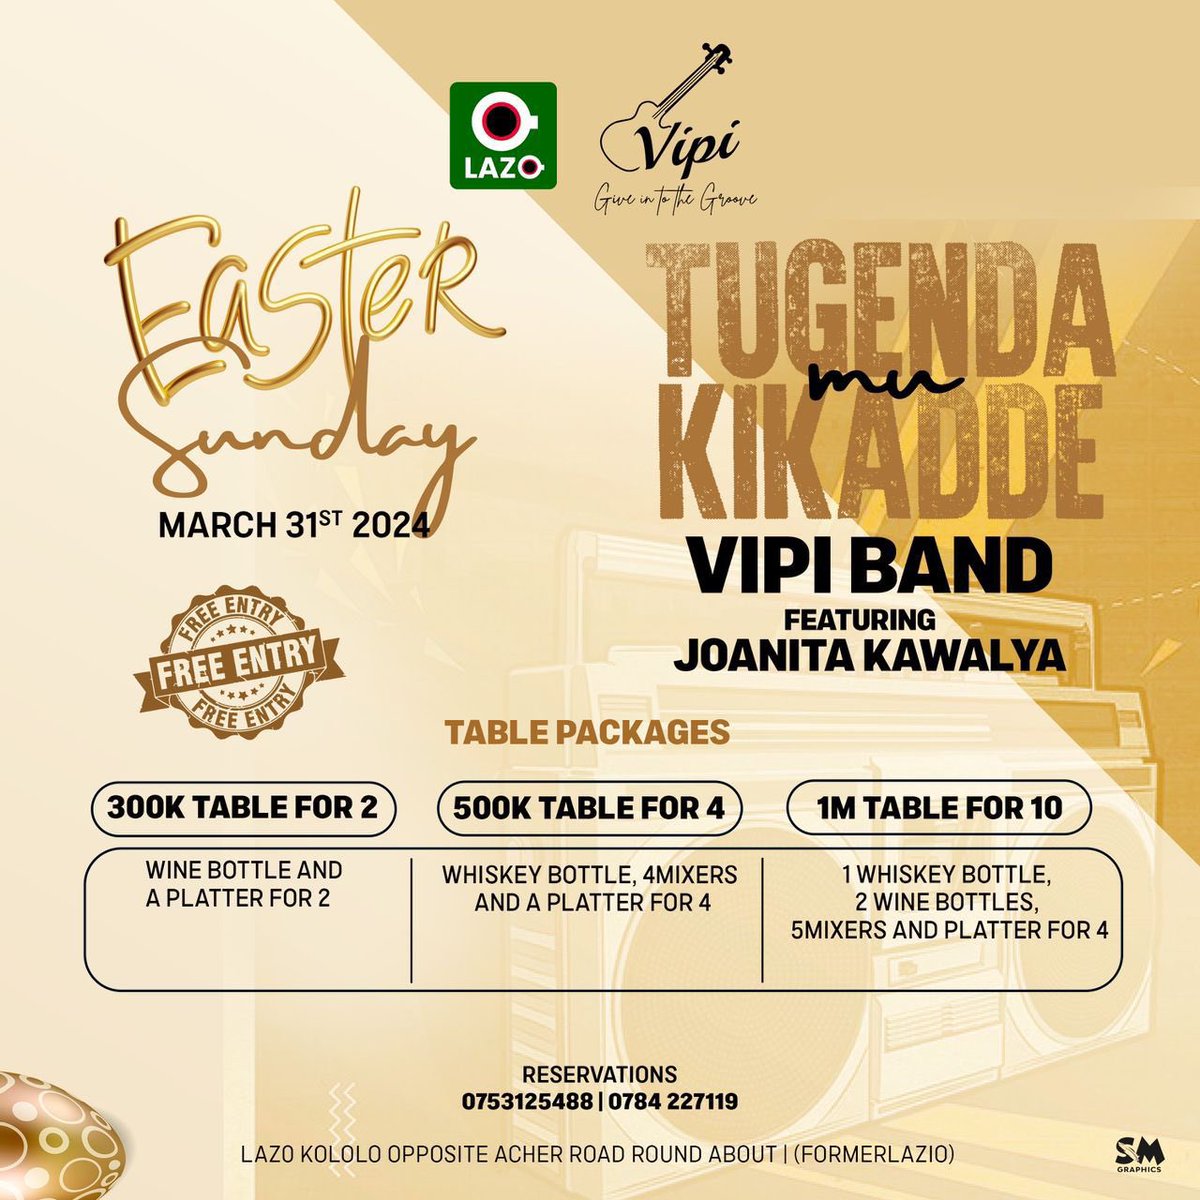 Tell a friend to tell a friend that the only plot for Easter is at @Lazio_Kampala with Joanita Kawalya & @Vipiband 🥳 Hope to see you there.🤗 #TugendeMuKikade